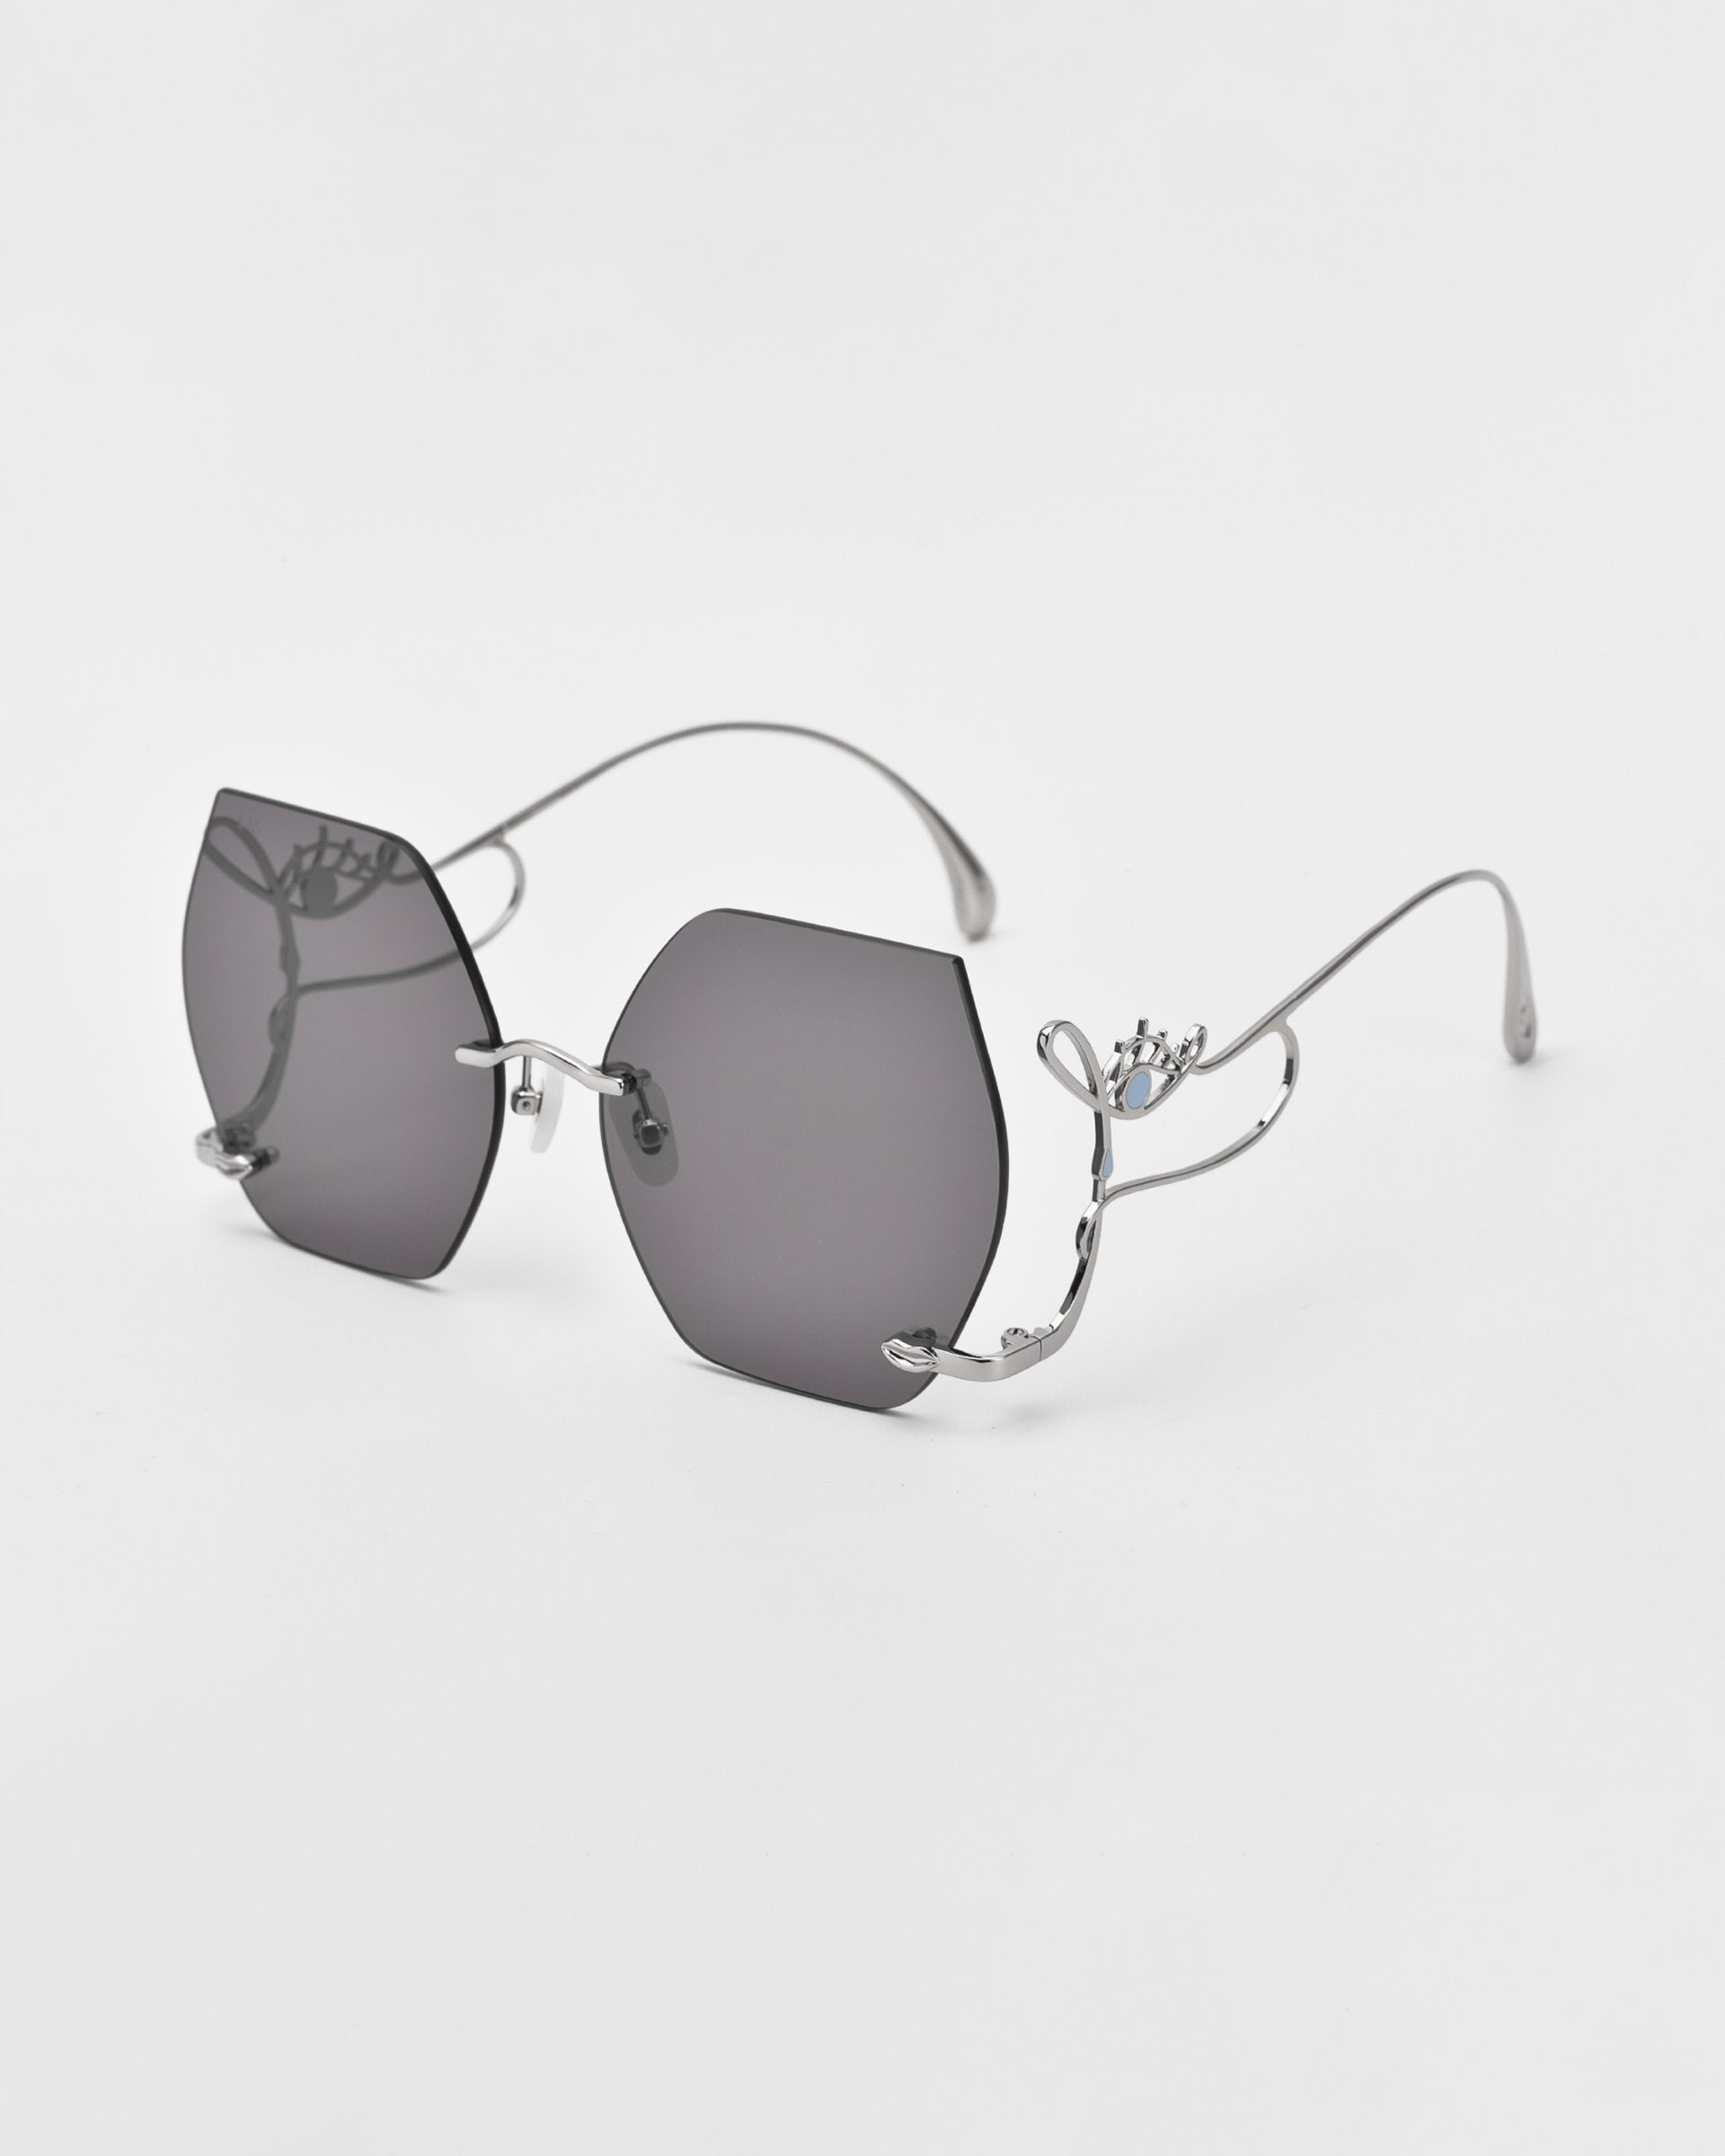 A pair of stylish, limited edition Cry Me a River sunglasses by For Art&#39;s Sake® with hexagonal-shaped dark-tinted lenses and thin silver metal frames. The design features an intricate decorative element on the arms, including a small crown detail and a tiny blue gem. The background is solid white.